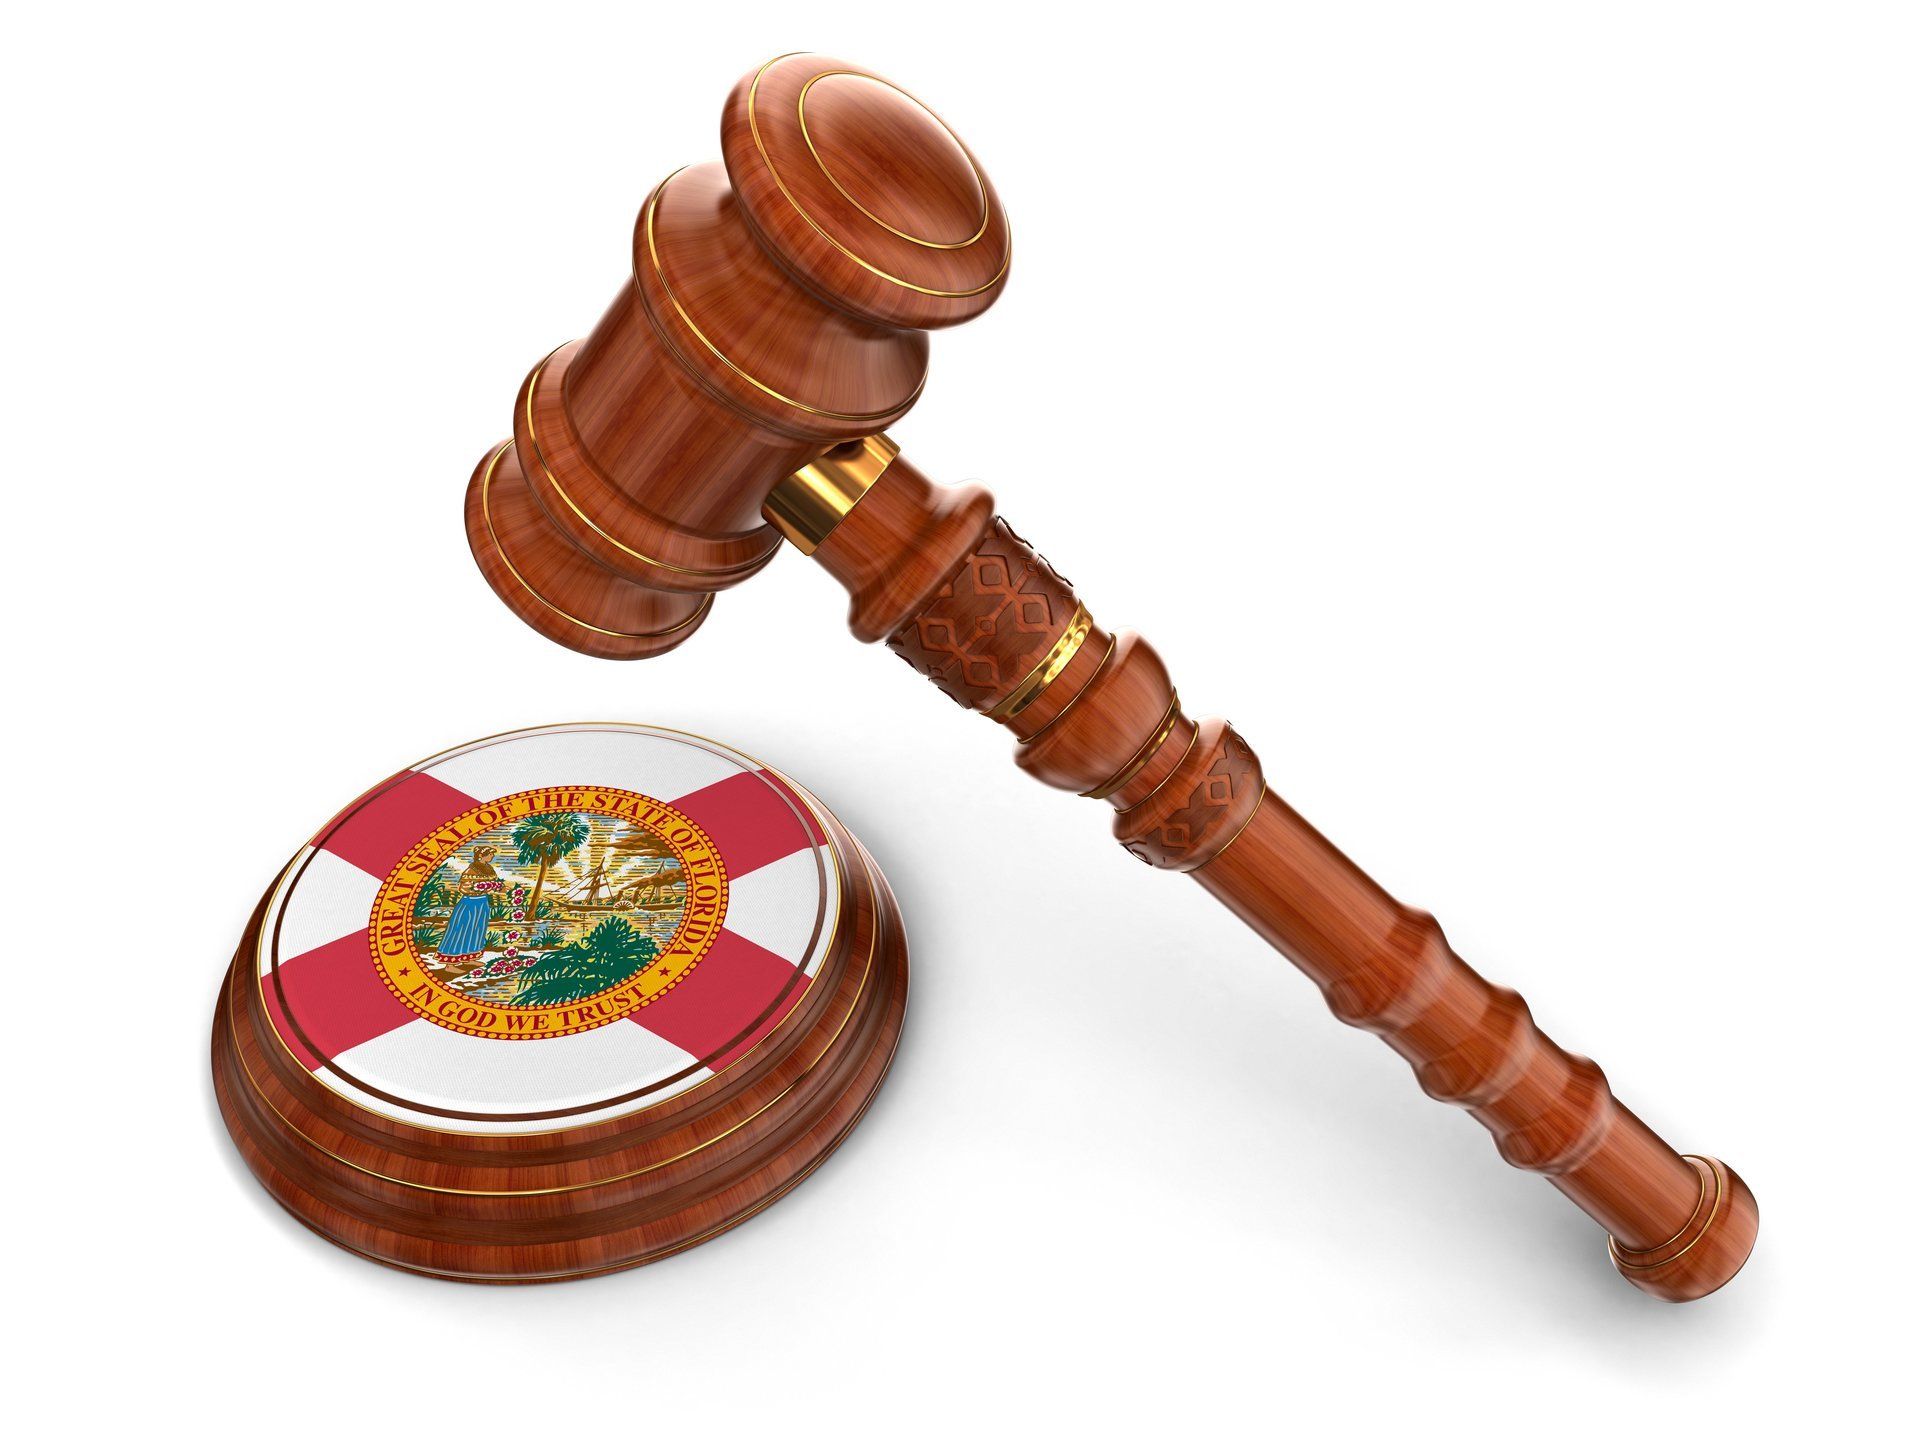 An Image of a wooden law gavel and a base with the Florida State Flag